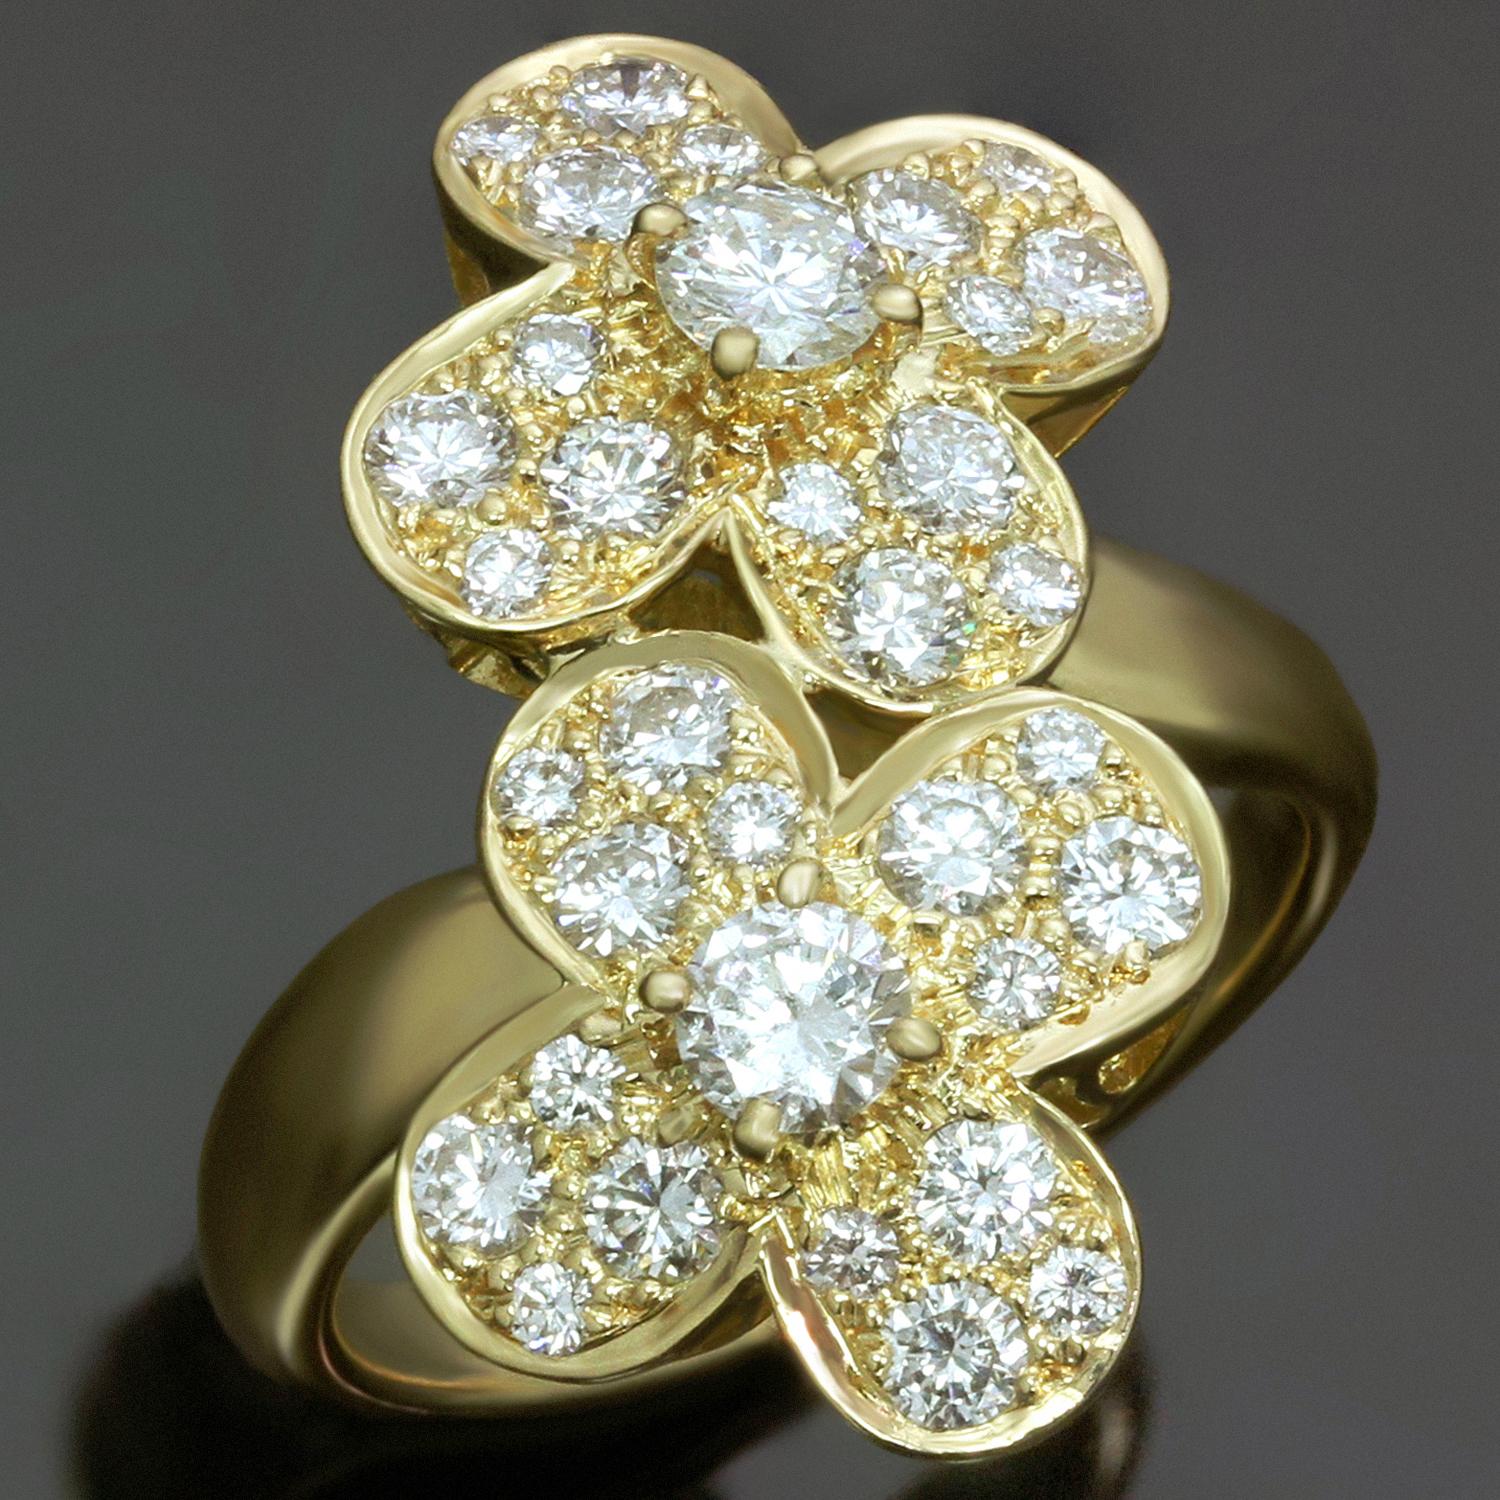 This stunning Van Cleefs & Arpels ring from the classic Trefle collection is crafted in 18k yellow gold and features a double clover flower motif set brilliant-cut round diamonds of 1.07 carats. Made in France circa 1990s. Measurements: 0.47